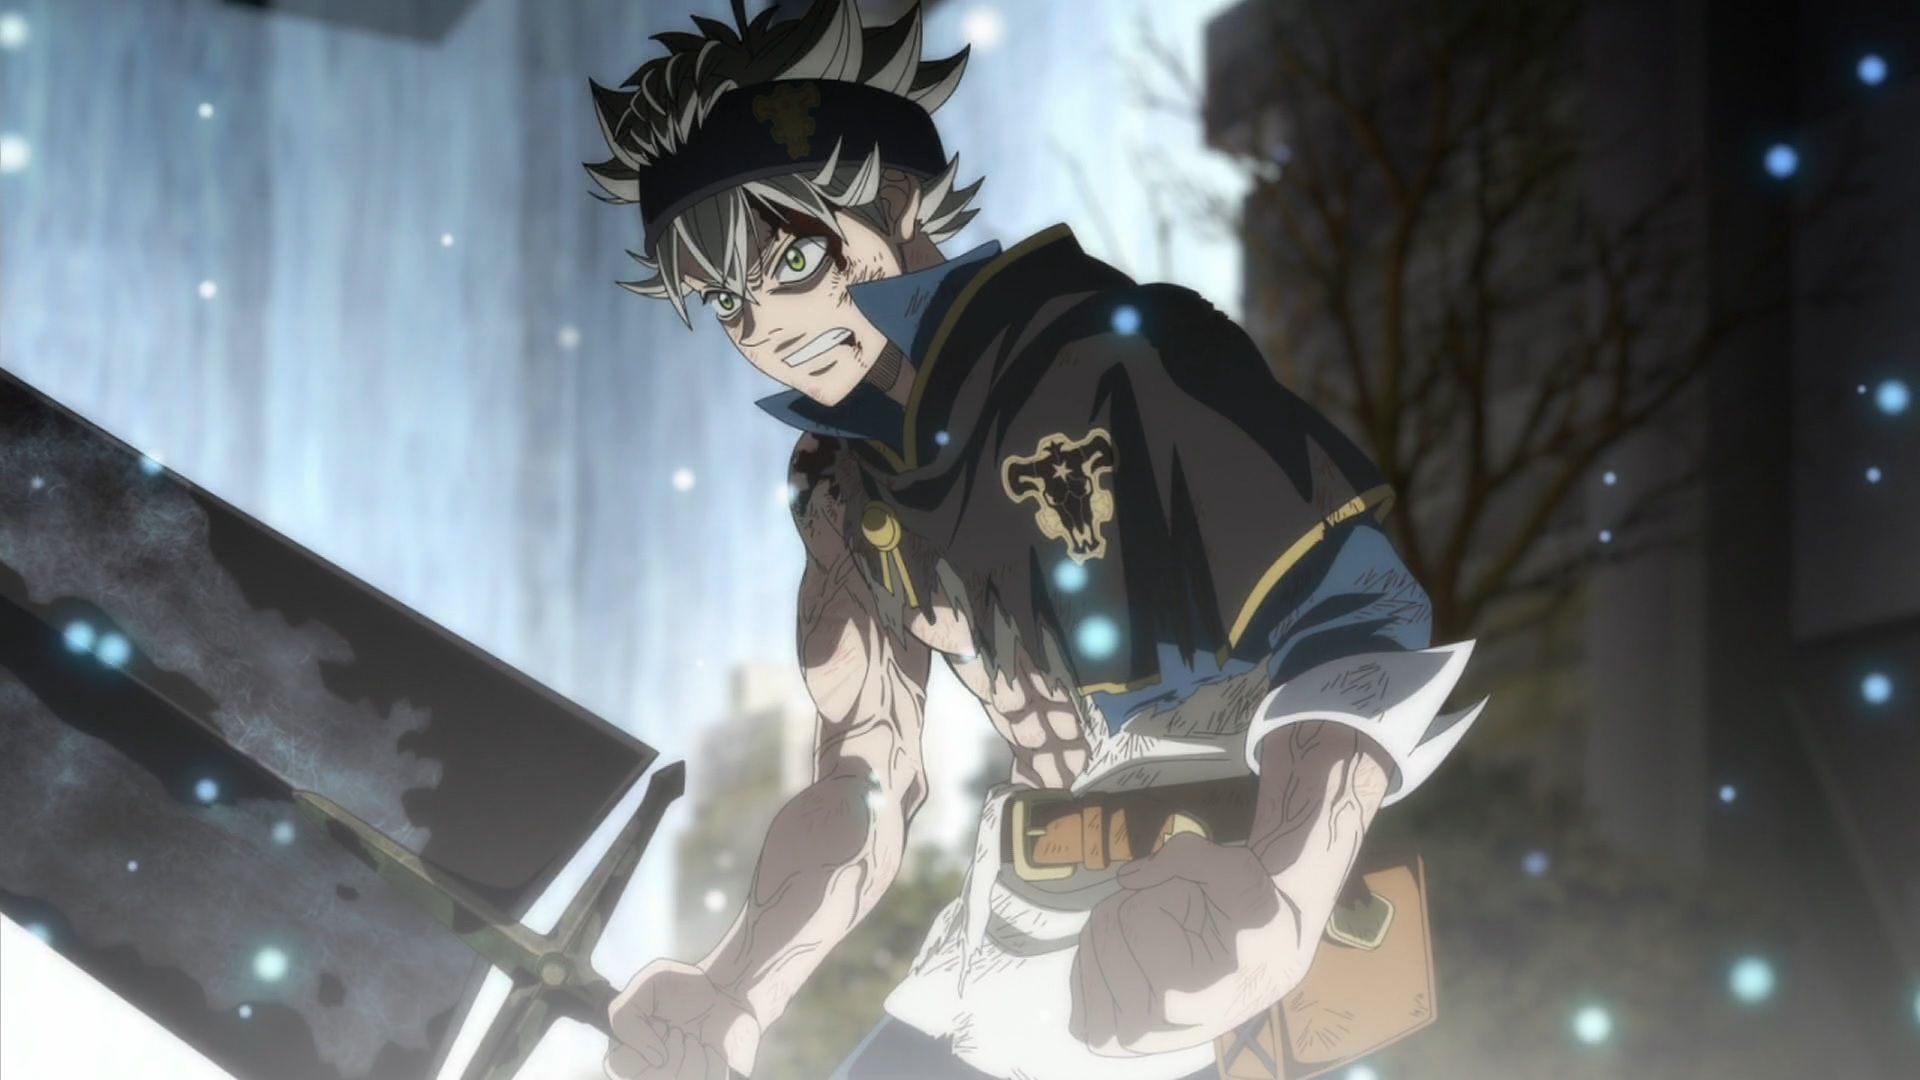 Black Clover is not badly animated, its just amazingly illustrated